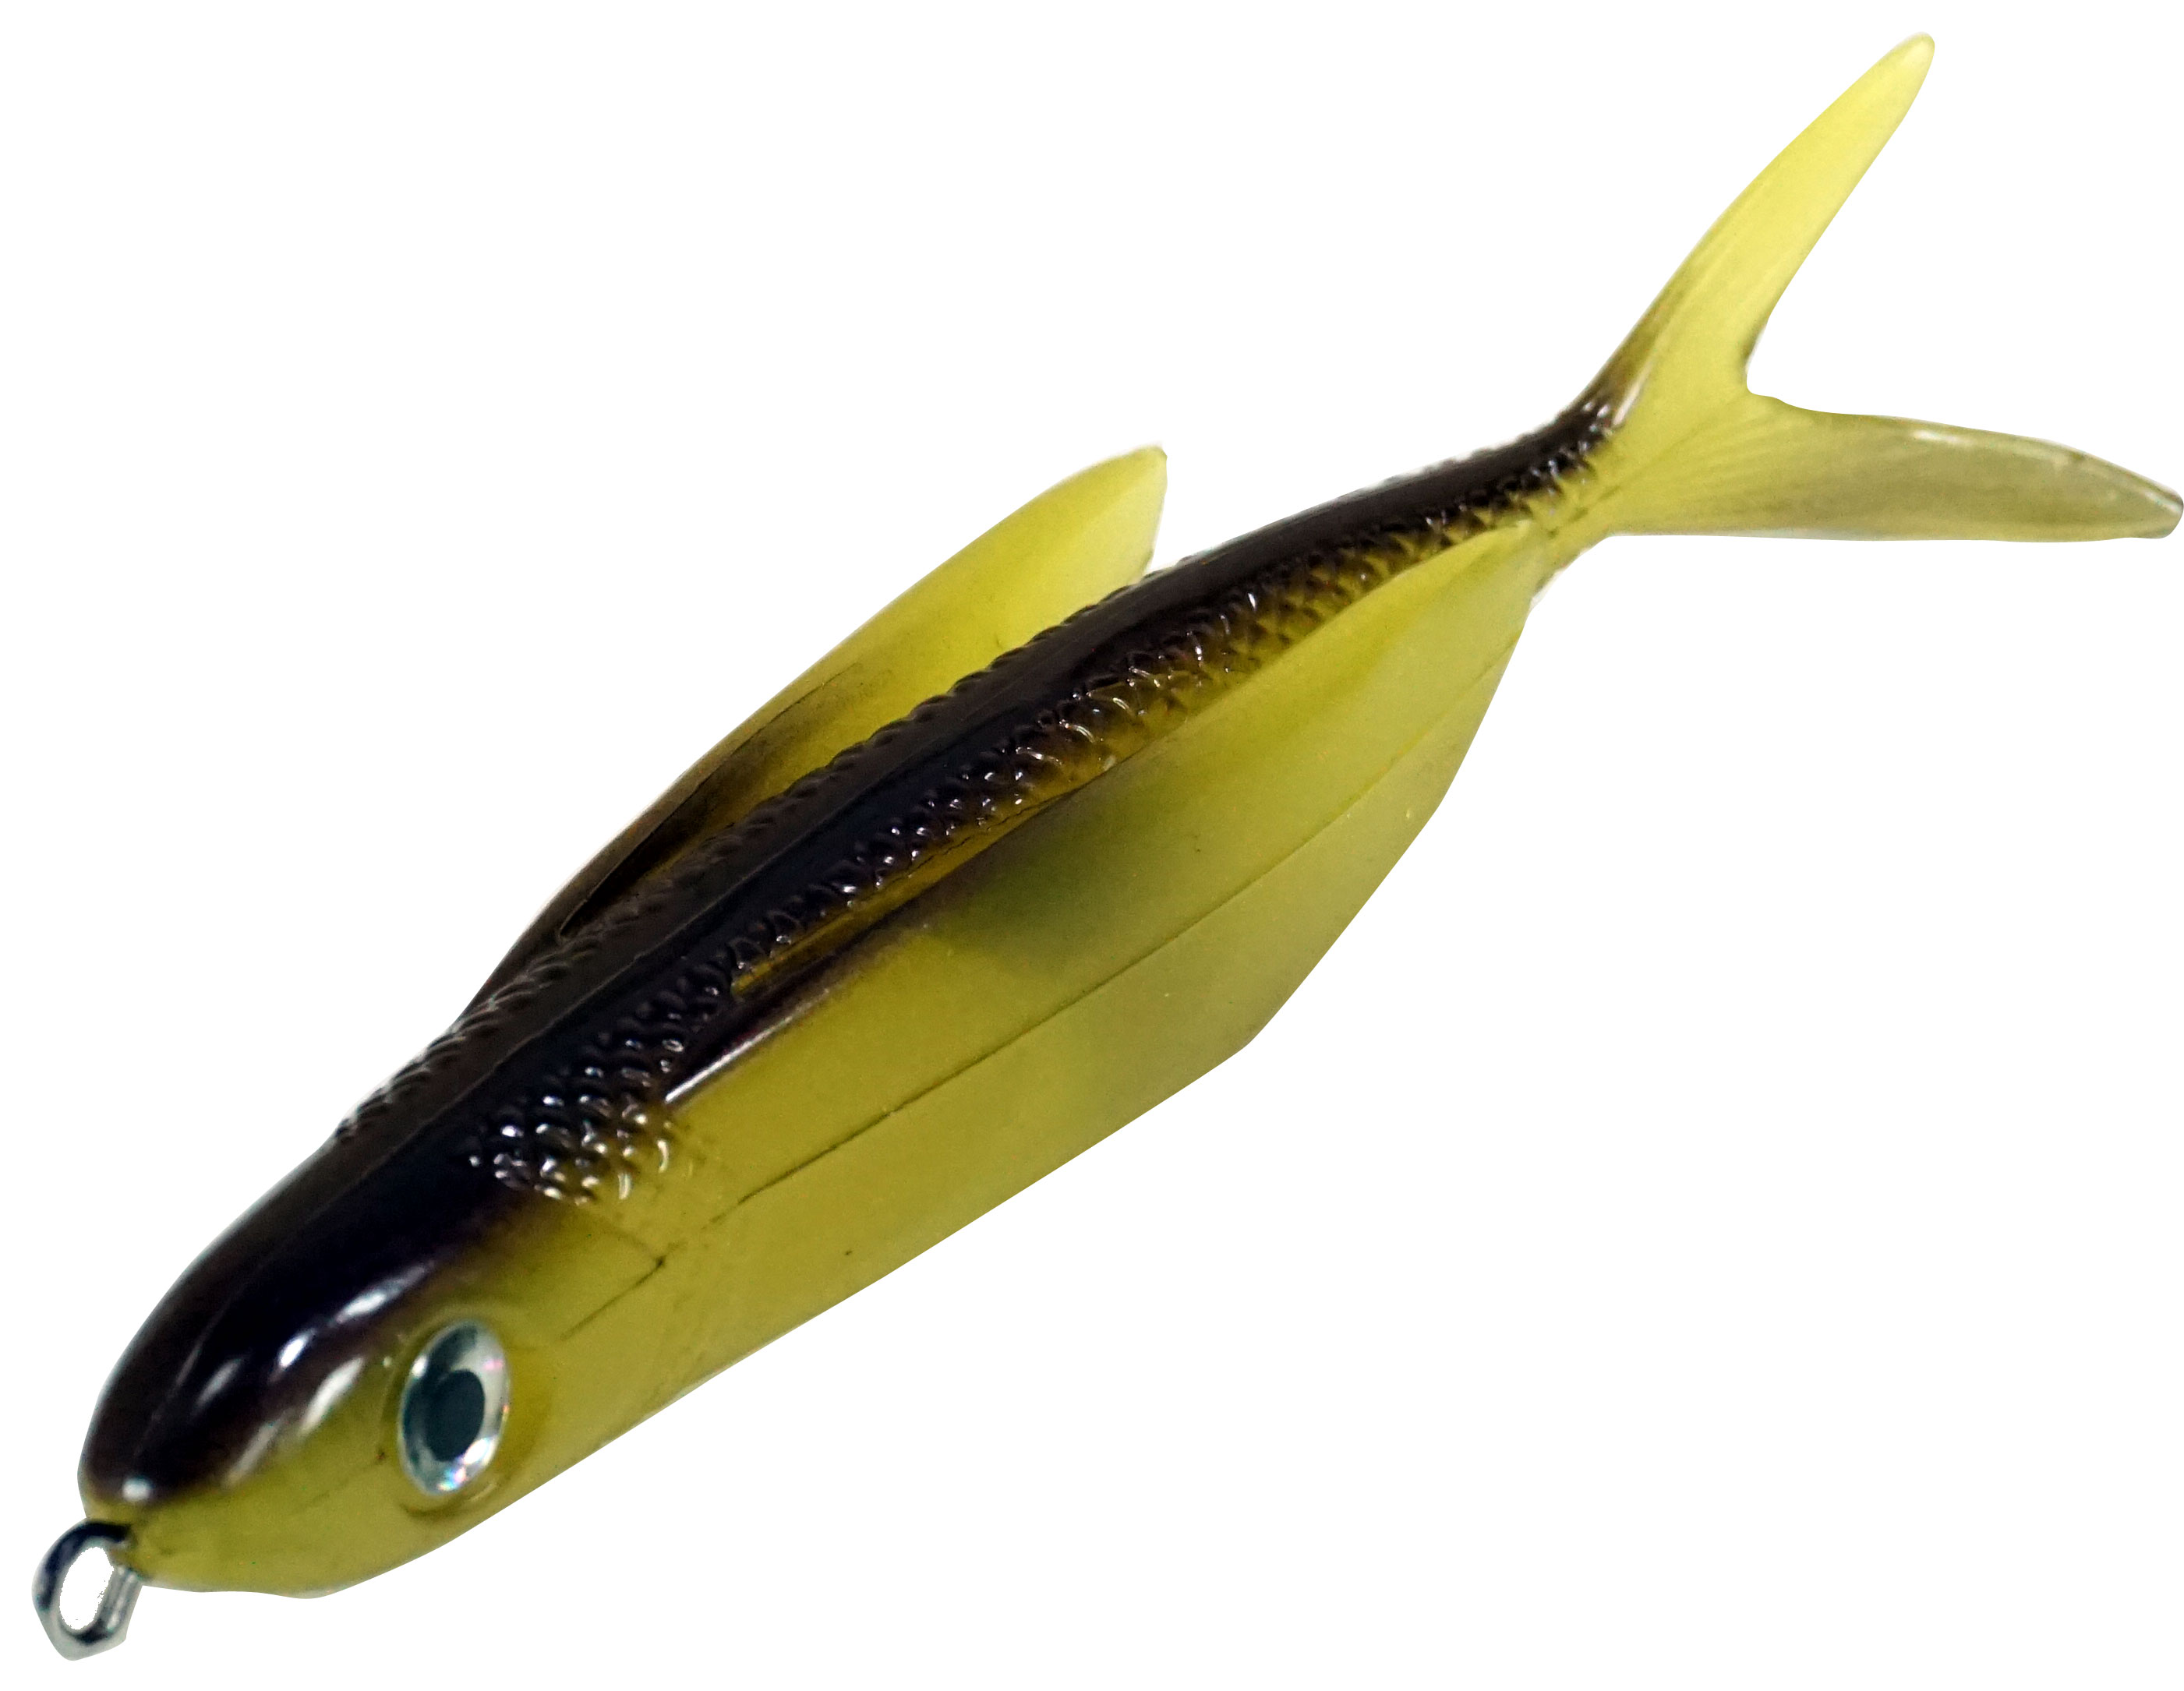 Almost Alive Lures 6" Soft Plastic Flying Fish with Swept Back Wing Bait Brown/Yellow with Spring